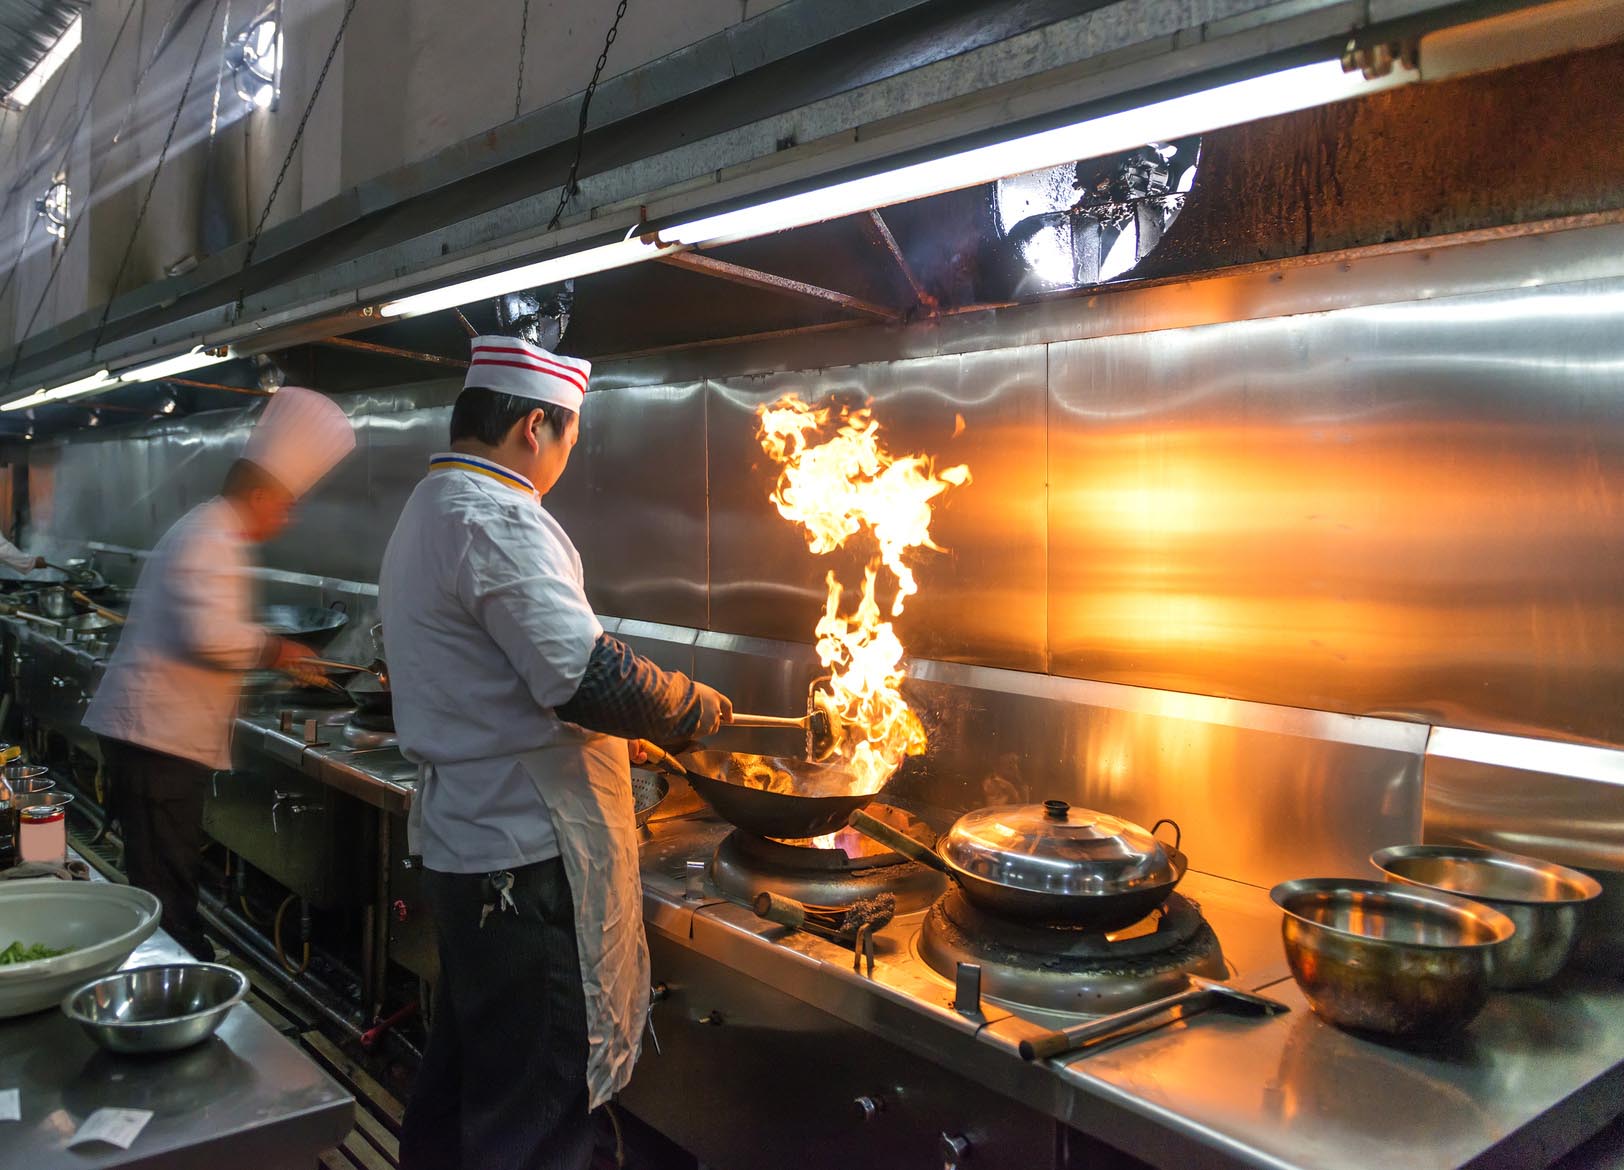 Asian chefs cooking in restaurant kitchen with giant flame coming out of a wok. Gourmet Spice Company, Wholesale Food Distributor.